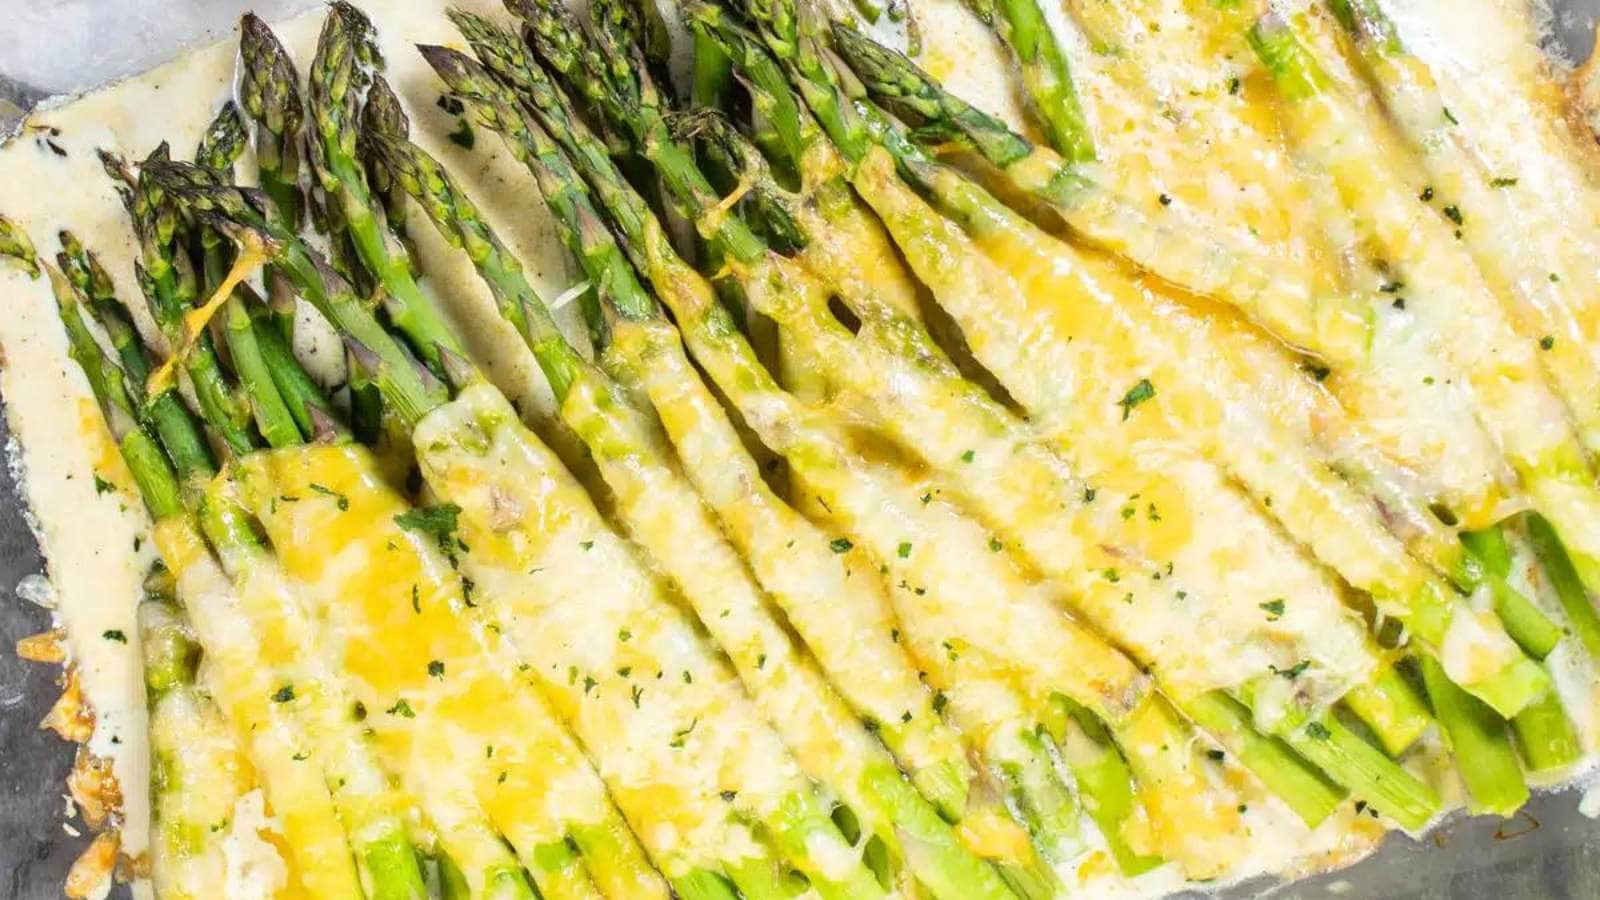  Cheesy Baked Asparagus recipe by Bake it with love.